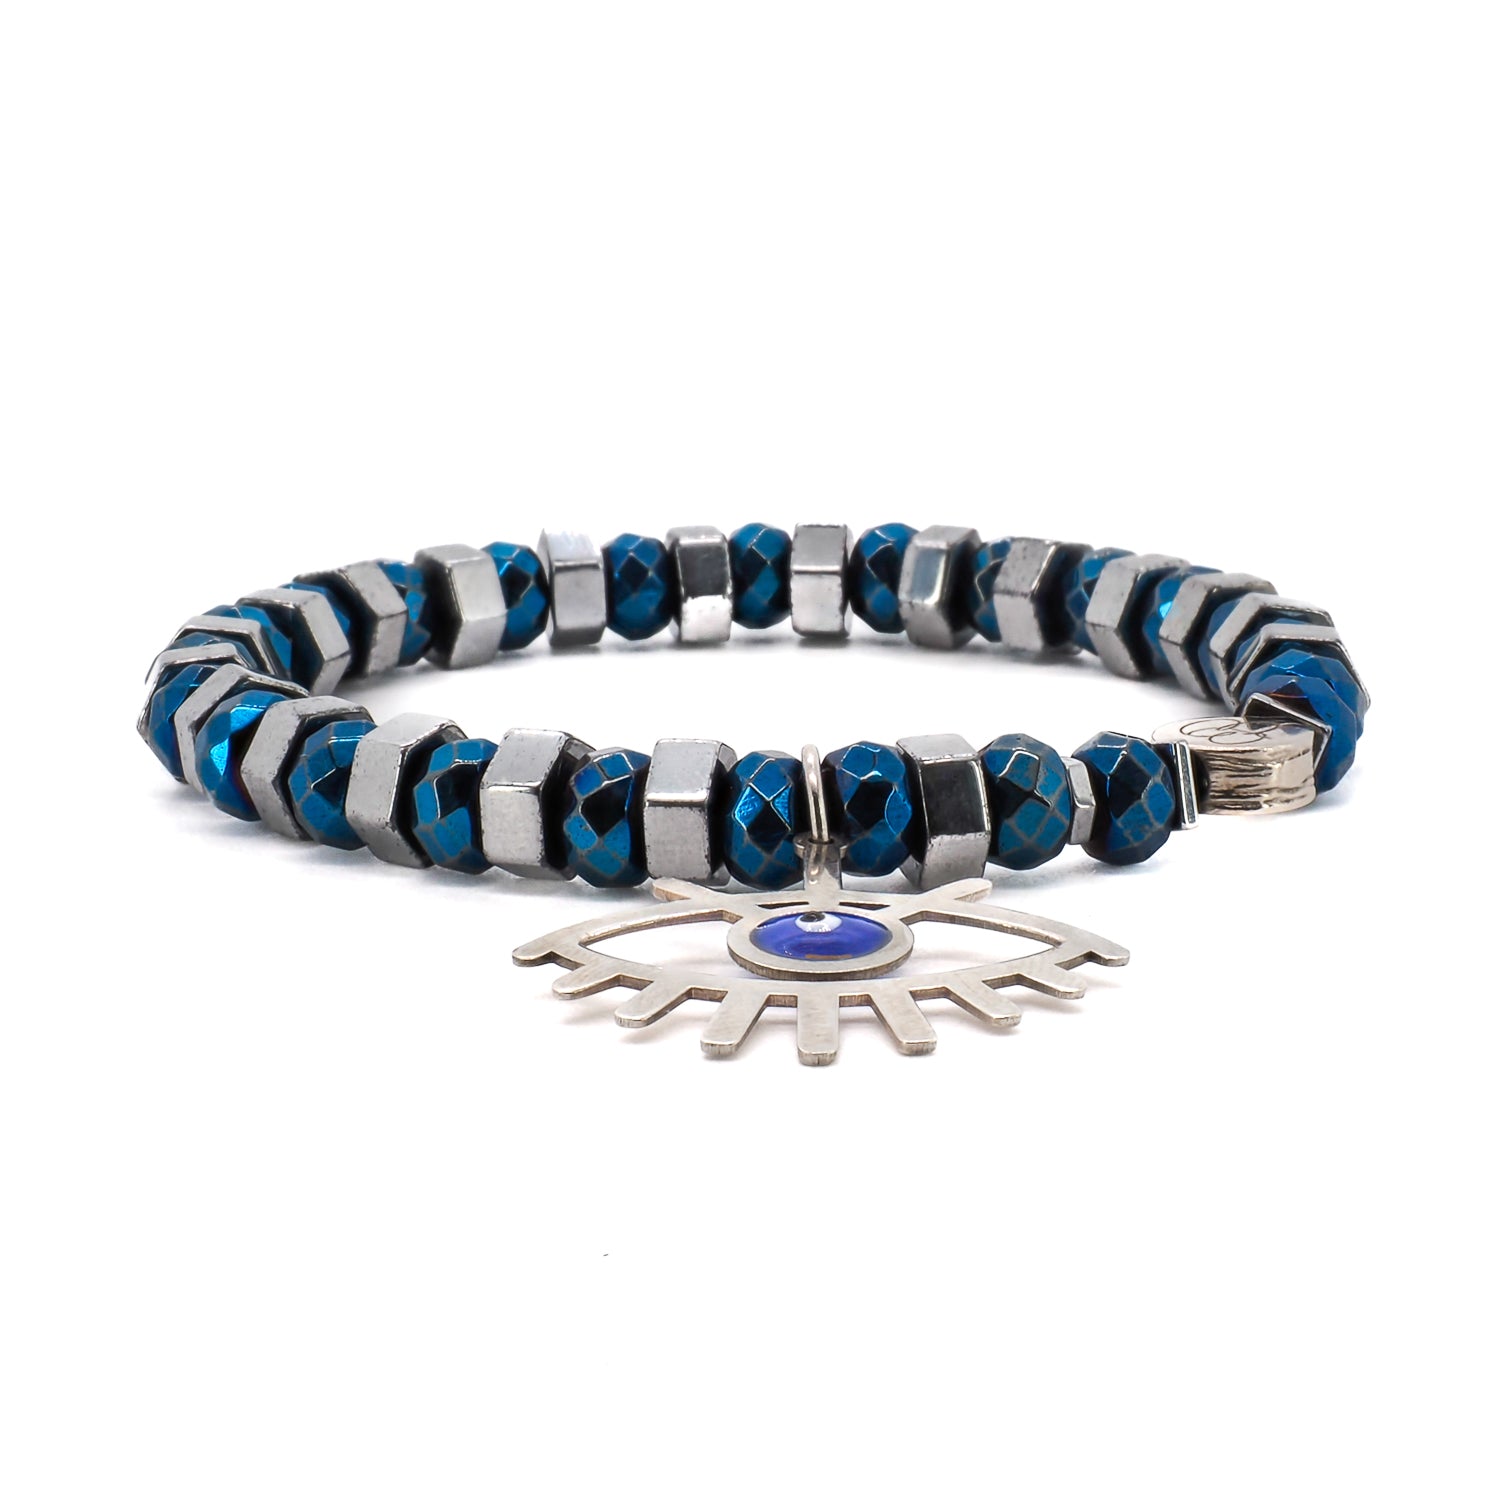 Experience the grounding properties of hematite with the Nazar Bracelet, adorned with a sterling silver evil eye charm.